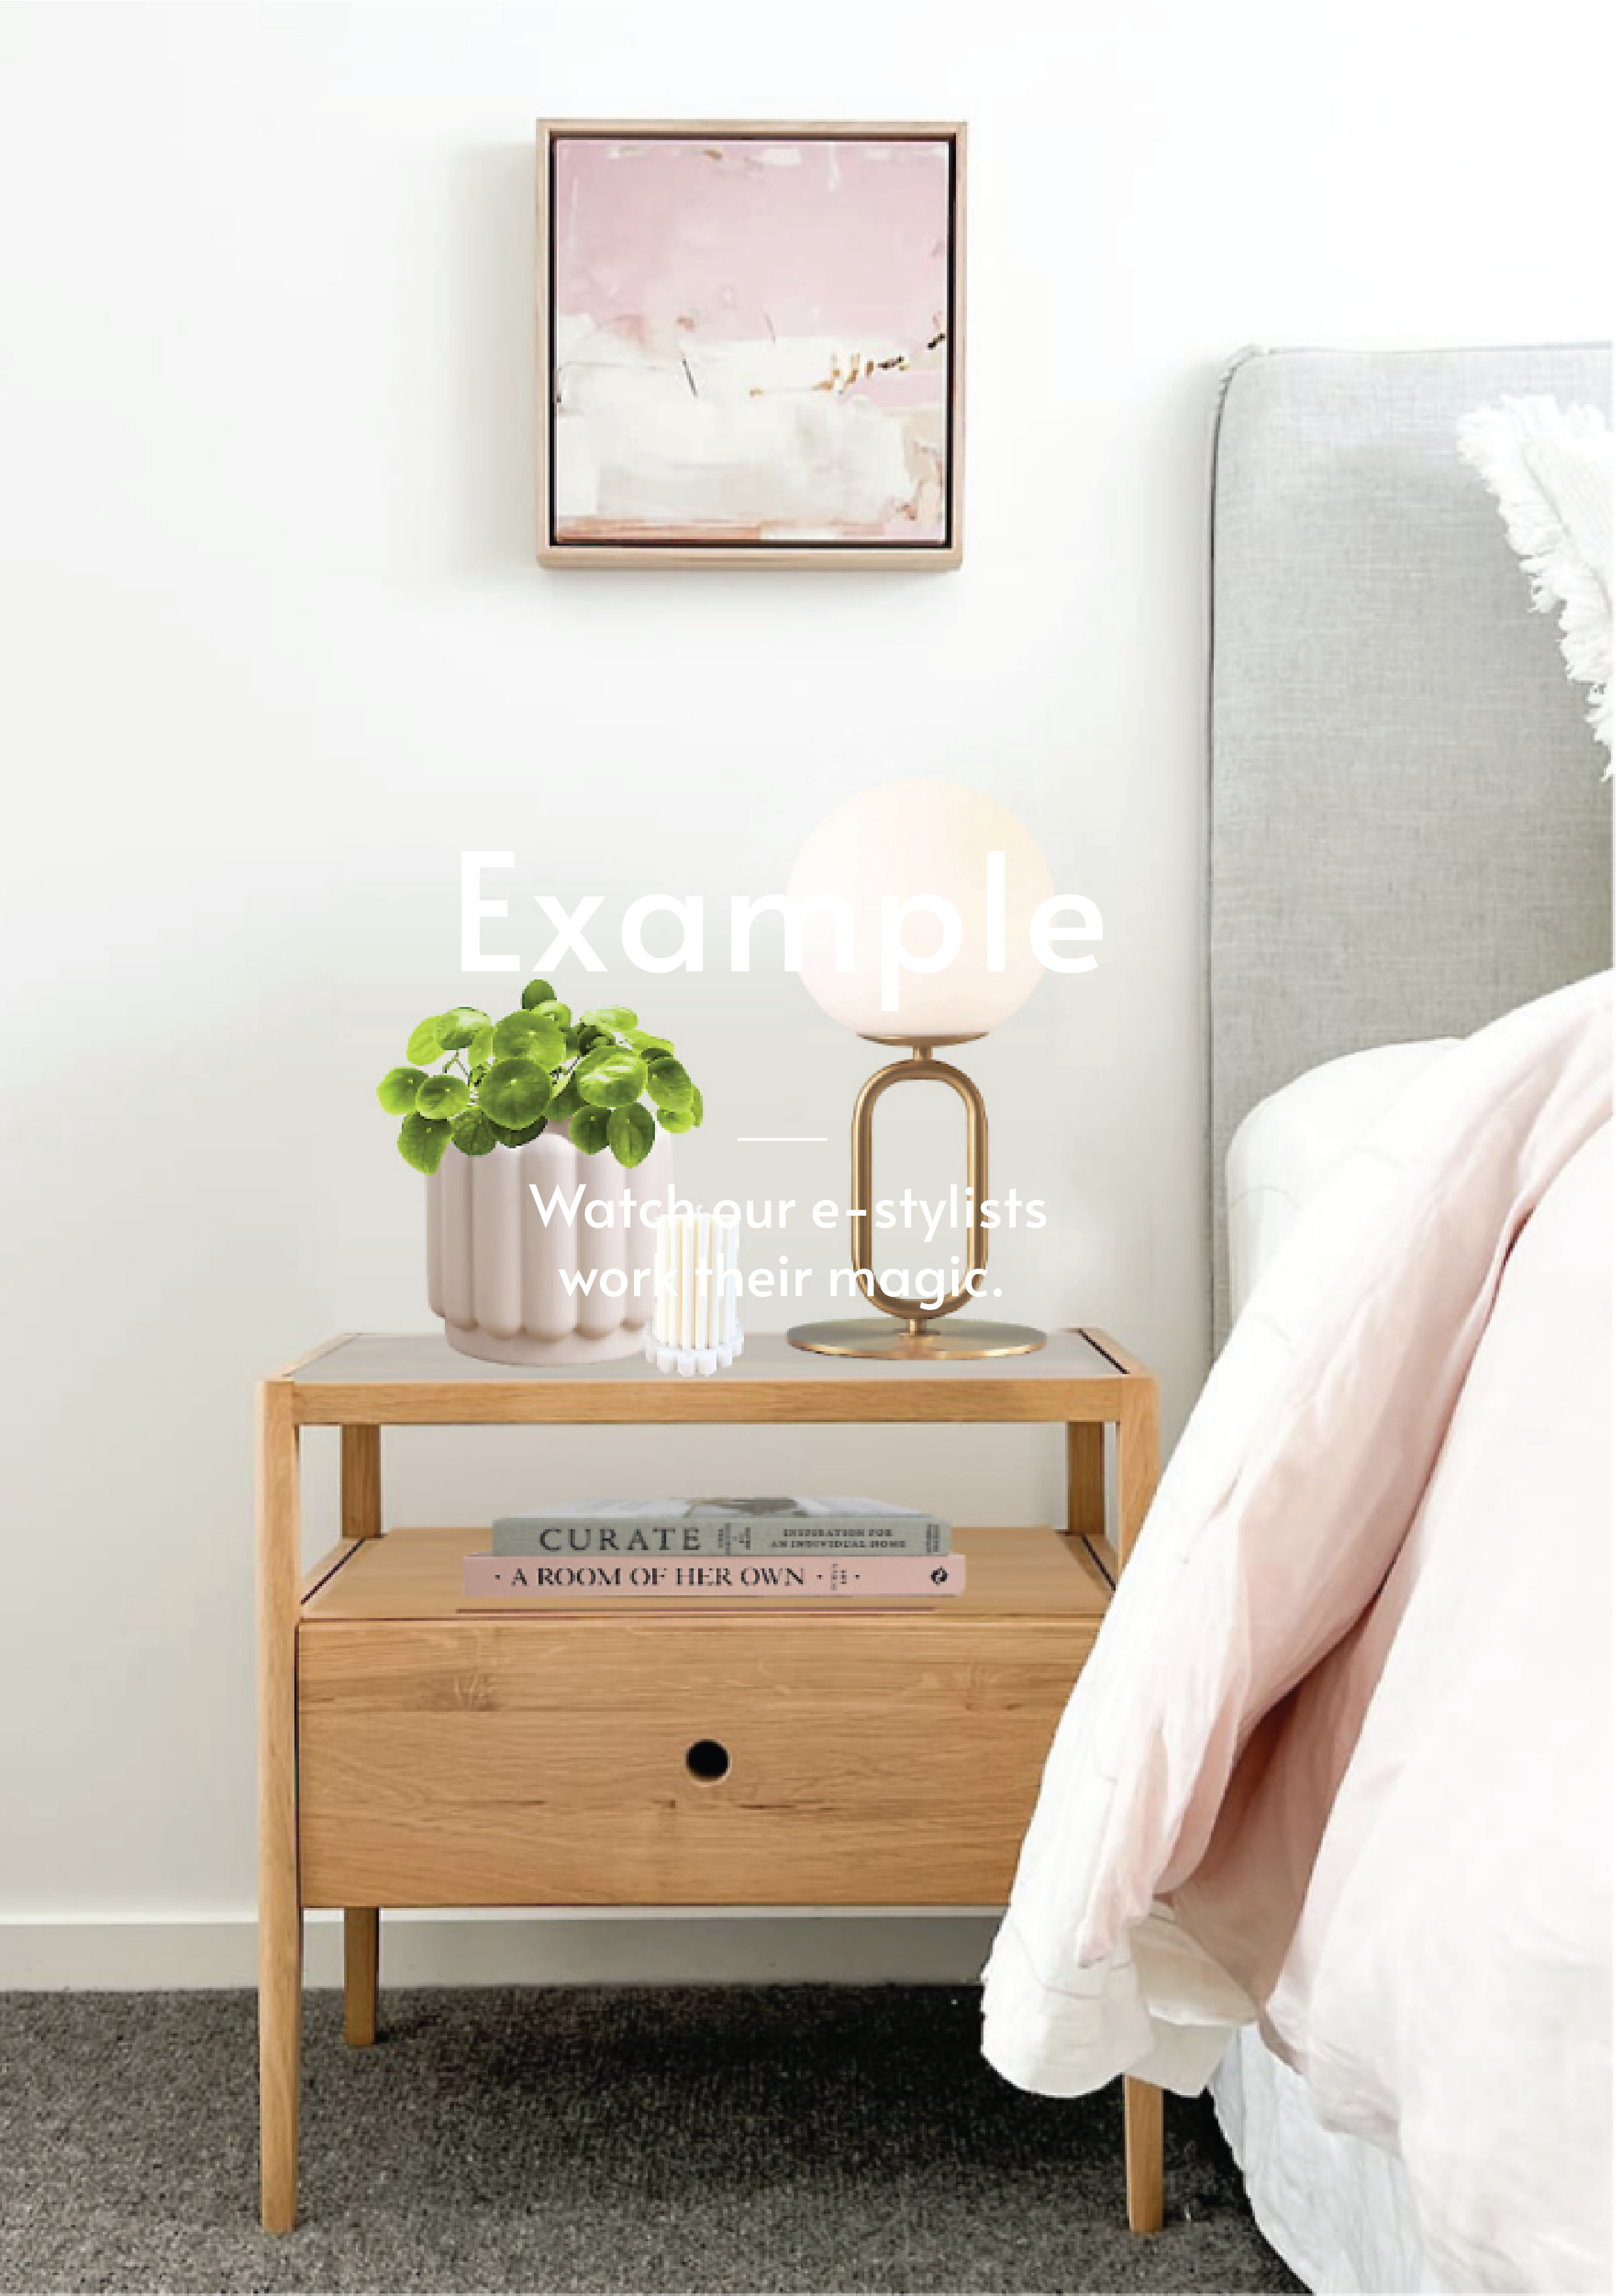 Style your Bedside Table like a Pro eService - (One bedside table) (7676092481785)